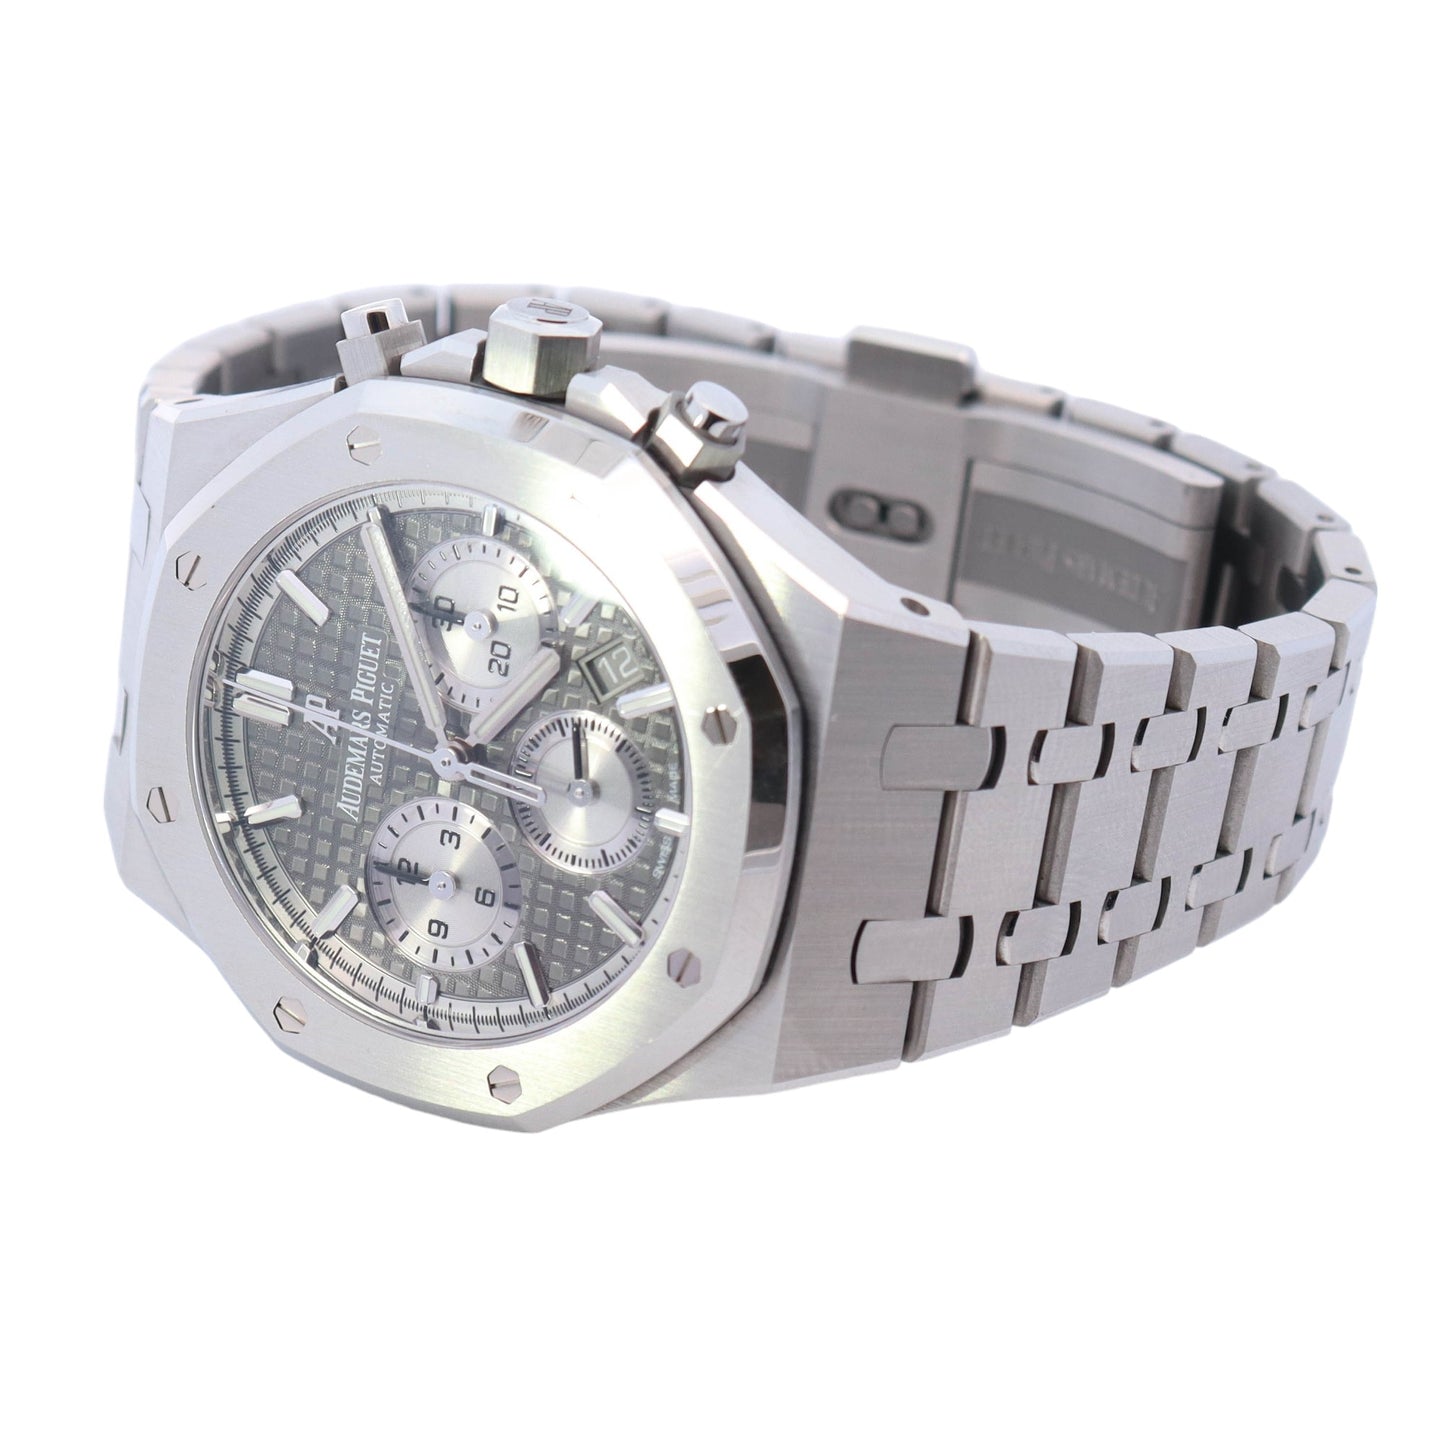 Audemars Piguet Royal Oak Stainless Steel 38mm Grey Chronograph Dial Watch Reference# 26315ST.OO.1256ST.02